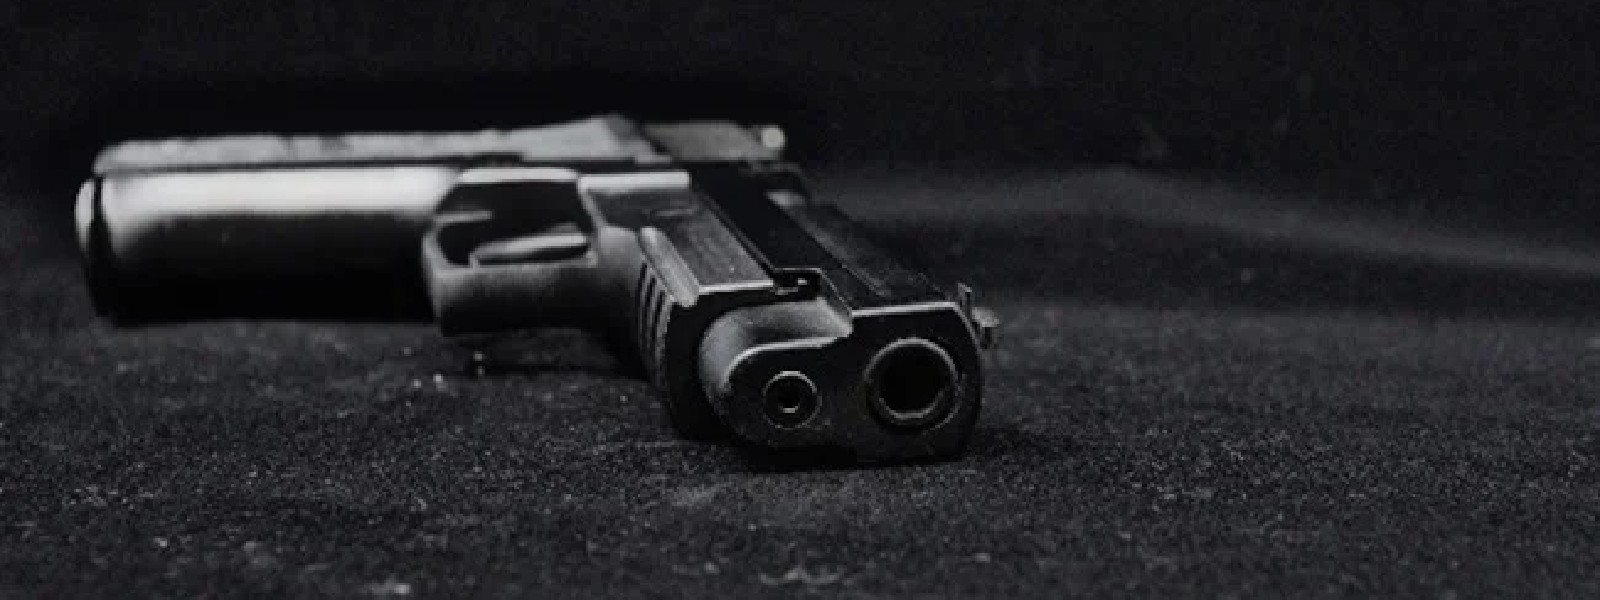 1 killed in accidental discharge of Police firearm